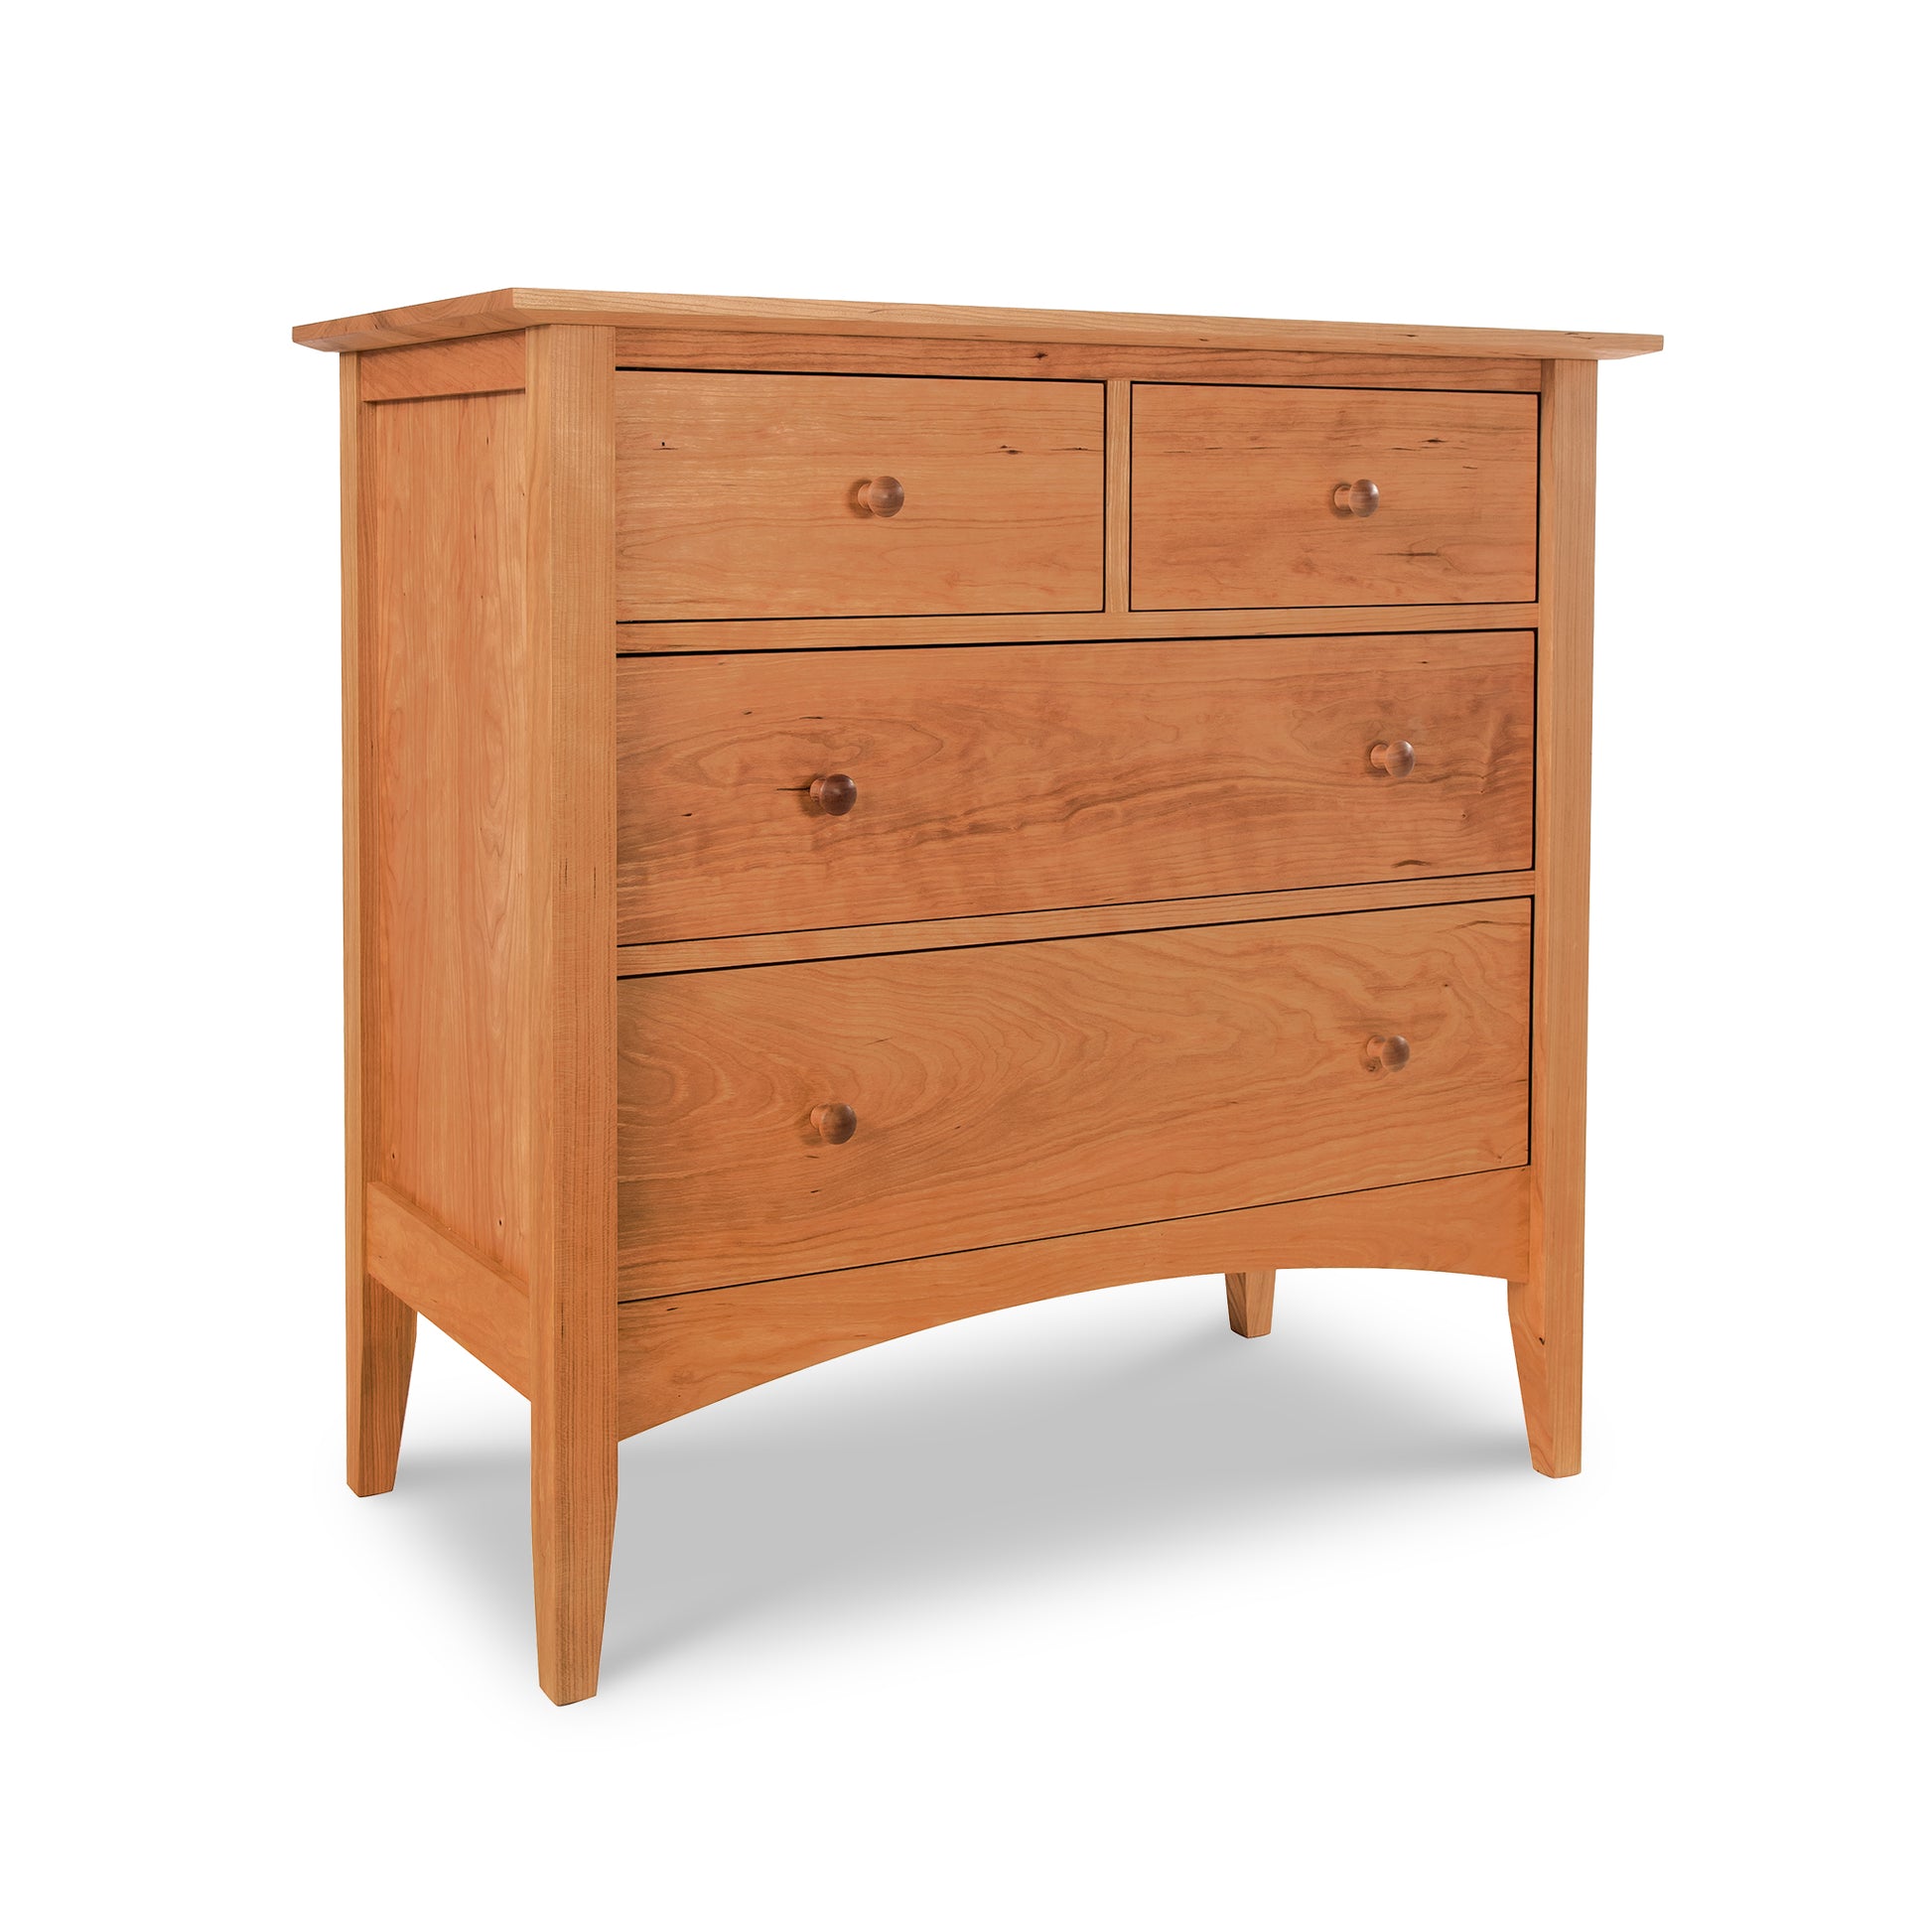 An American Shaker 4-Drawer Chest from Maple Corner Woodworks on a white background.